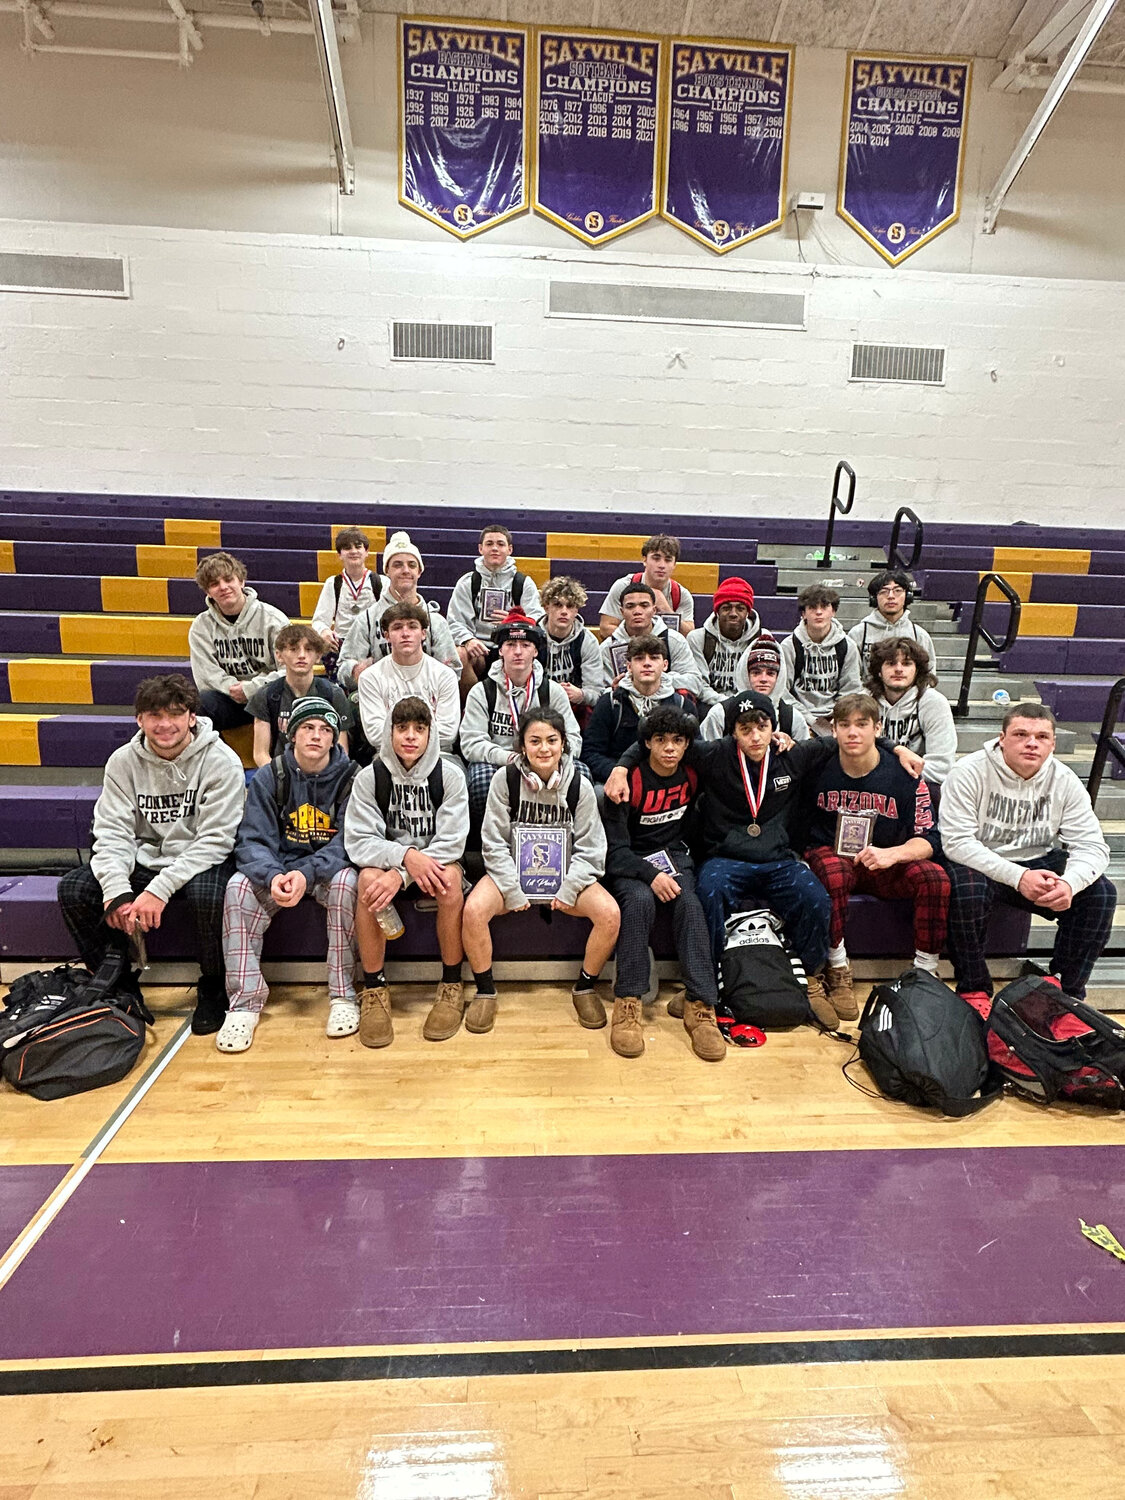 The Connetquot wrestling team took first place honors in the Sayville Invitational wrestling tournament. Sixteen Connetquot wrestlers placed to secure the team win